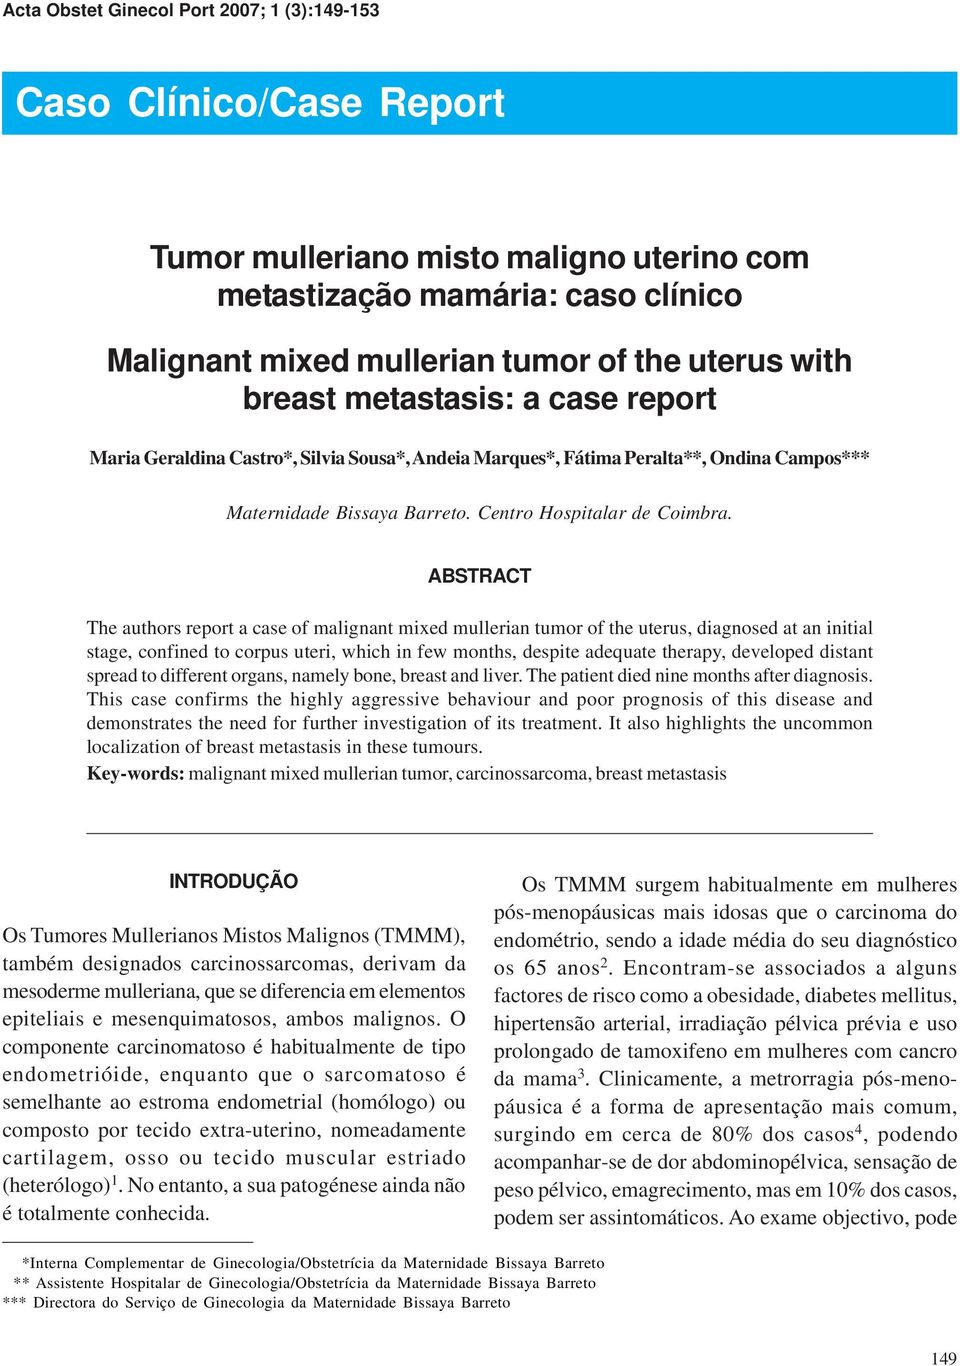 ABSTRACT The authors report a case of malignant mixed mullerian tumor of the uterus, diagnosed at an initial stage, confined to corpus uteri, which in few months, despite adequate therapy, developed